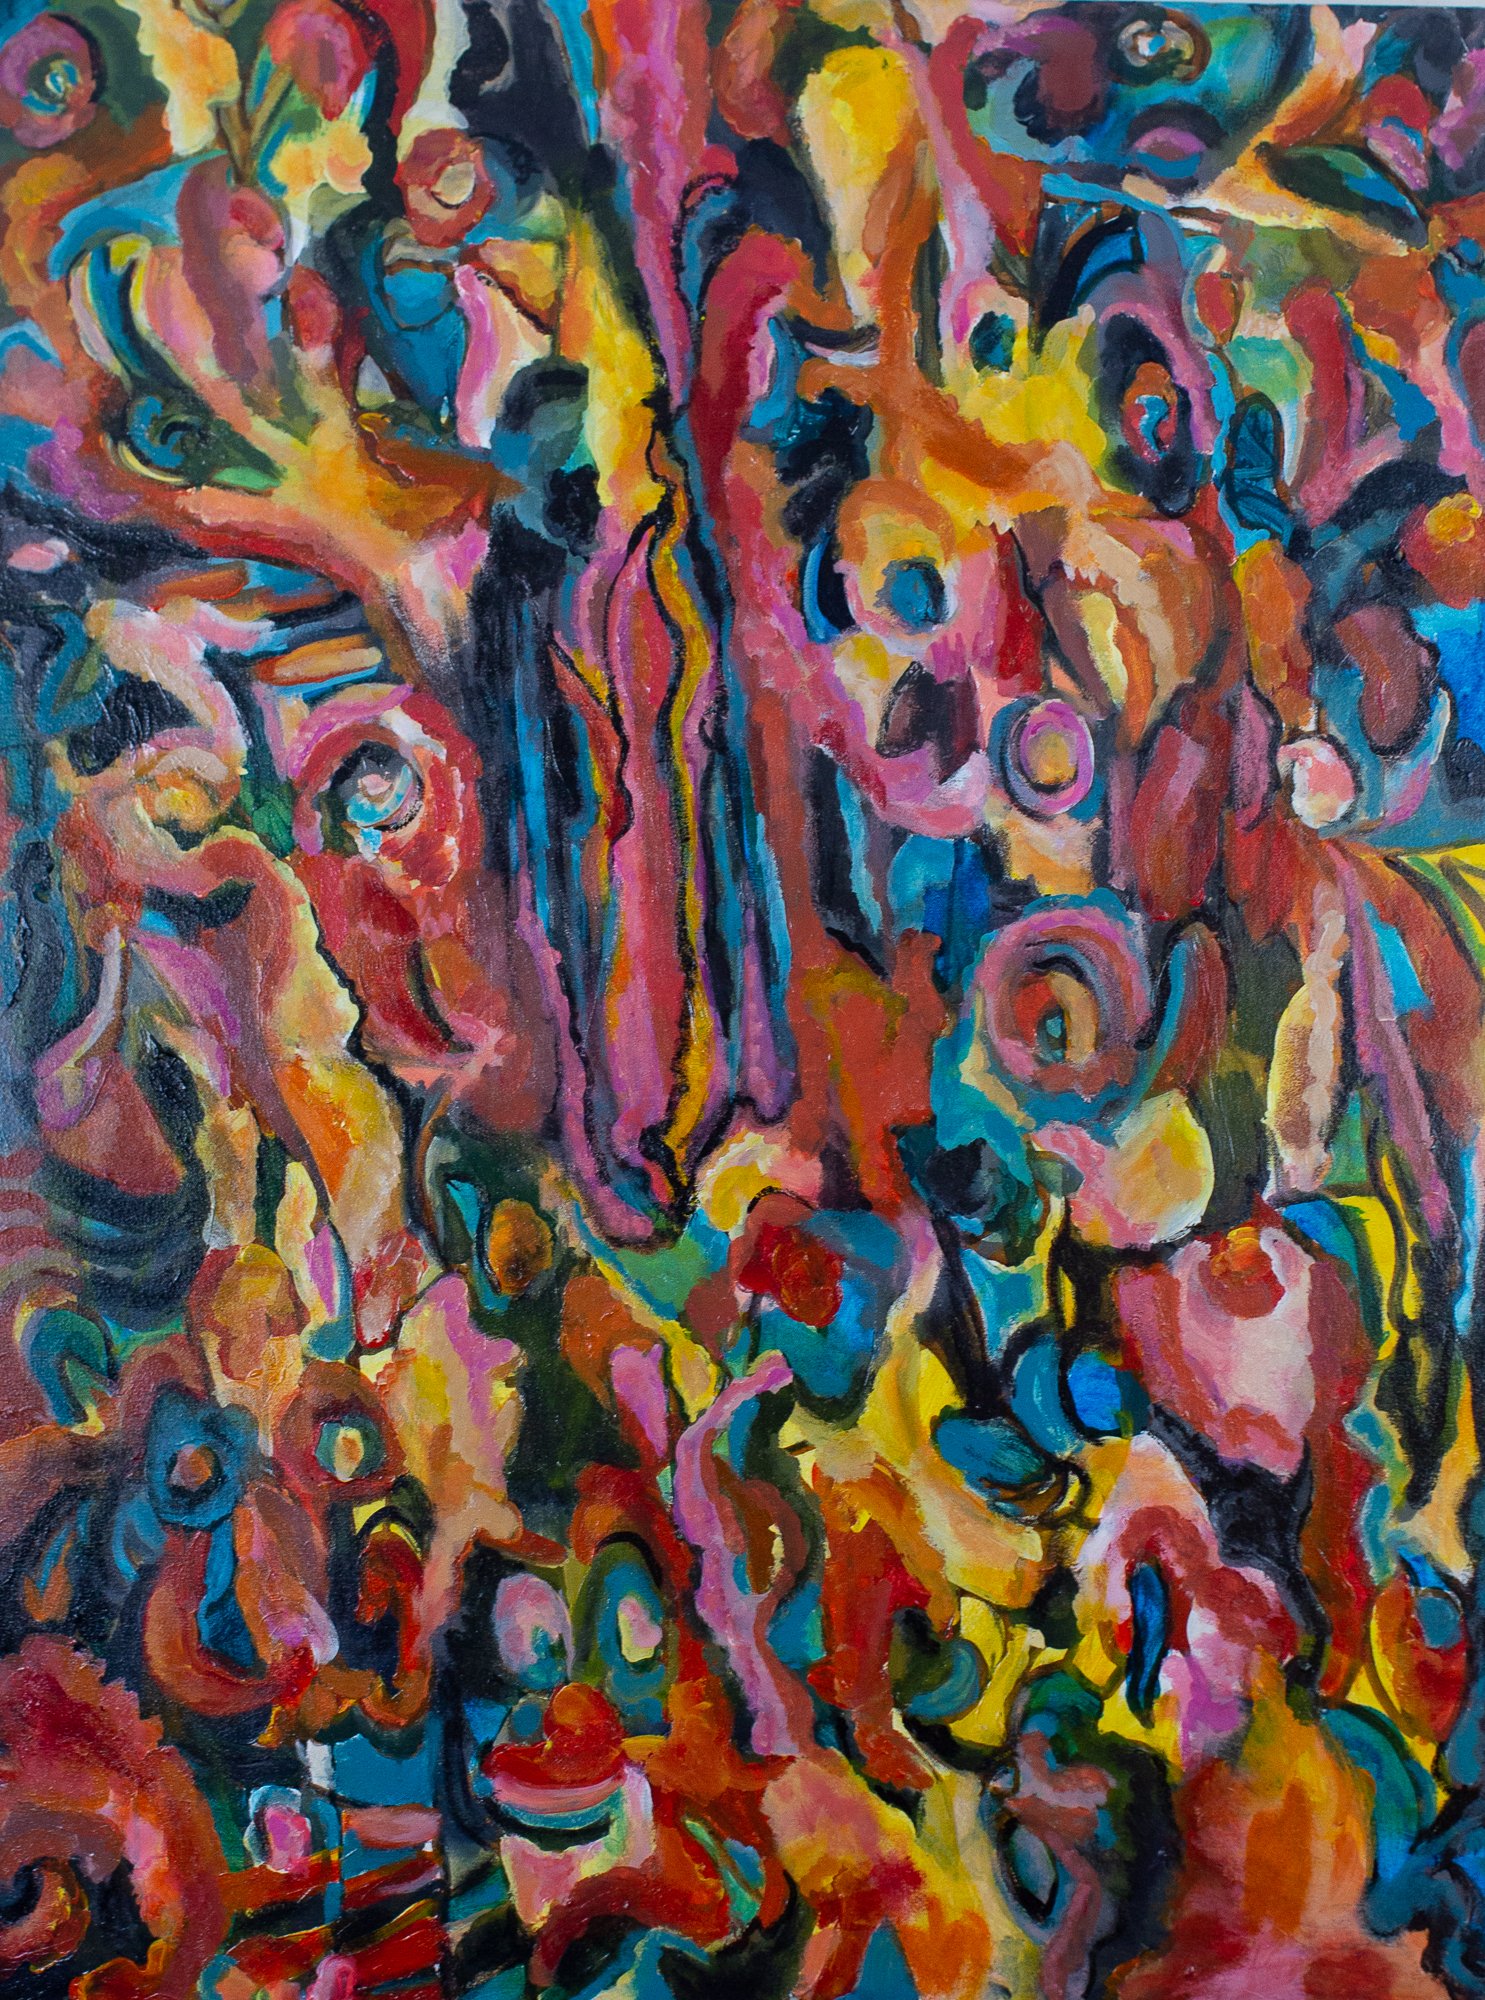   &nbsp;“Running Wild” 48” X 36”X 1.5”; Painting $2400.    Lifting restraints and letting your imagination run Free! Free! Free!        